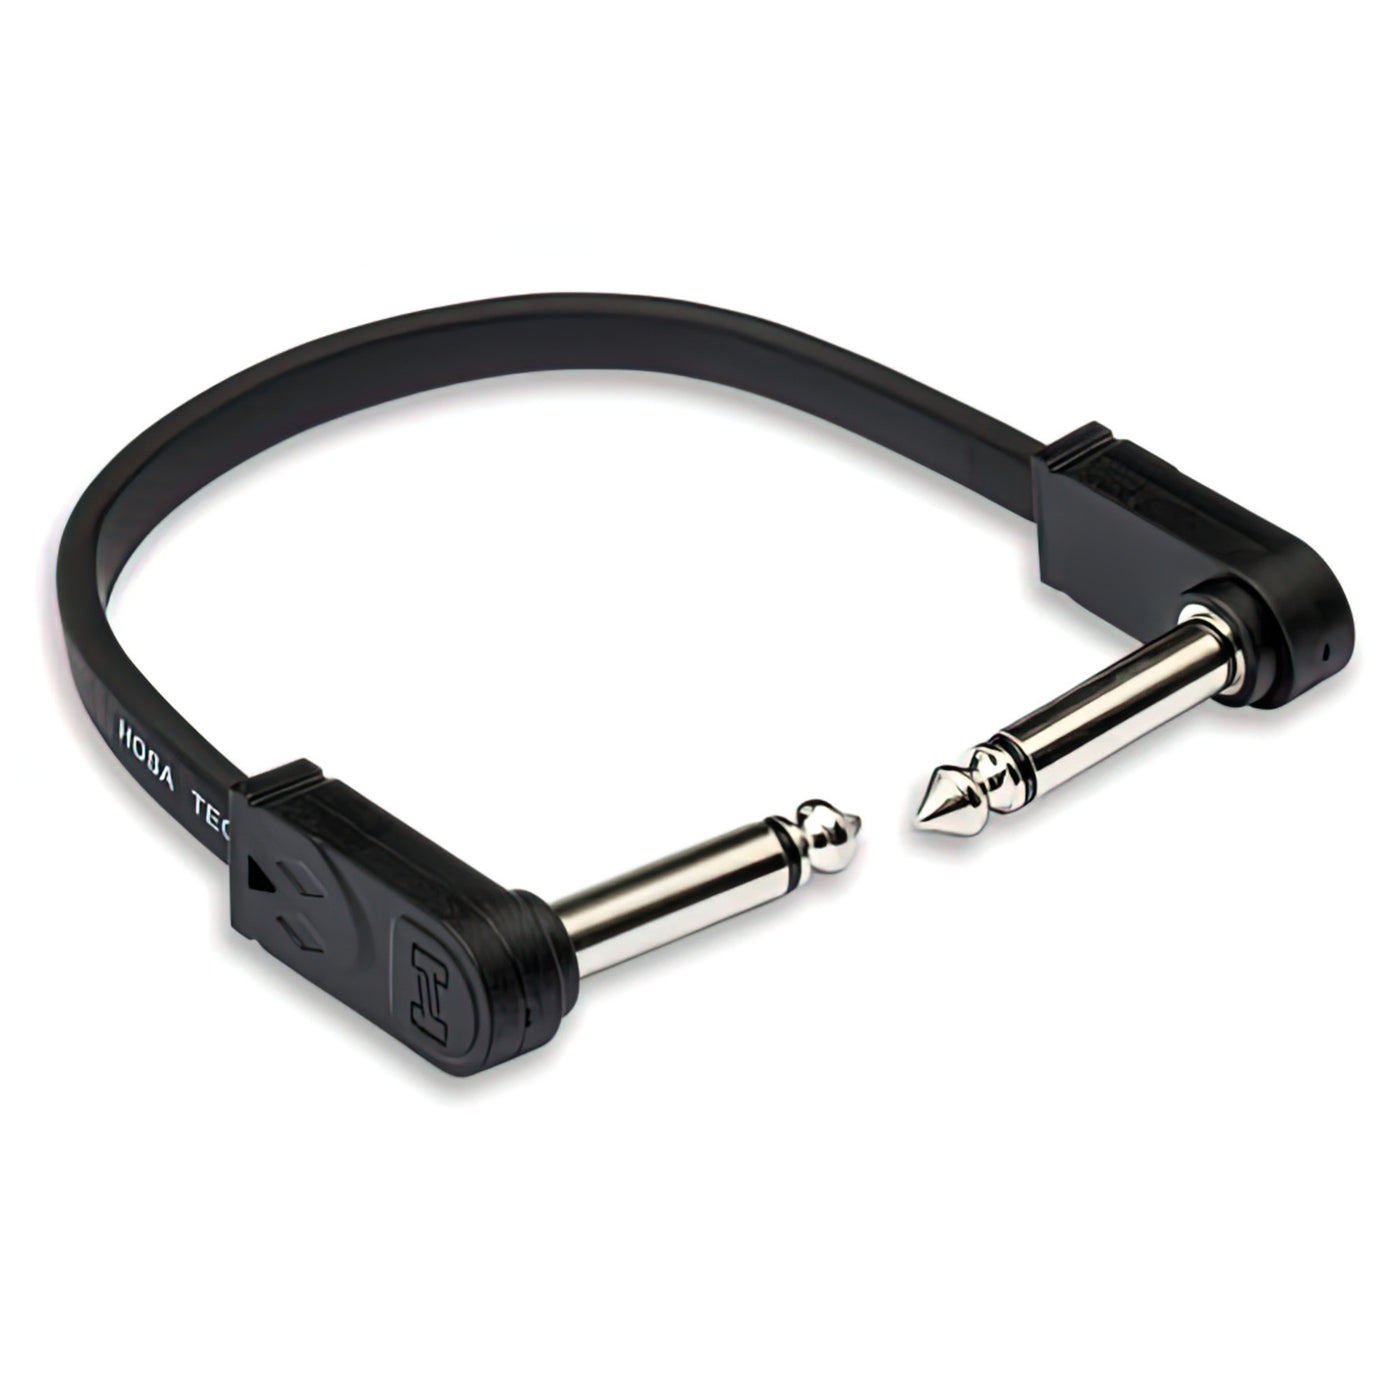 Hosa Flat Guitar Pedalboard Patch Cable, Right Angle to Right Angle, 12-Inch (CFP-112)